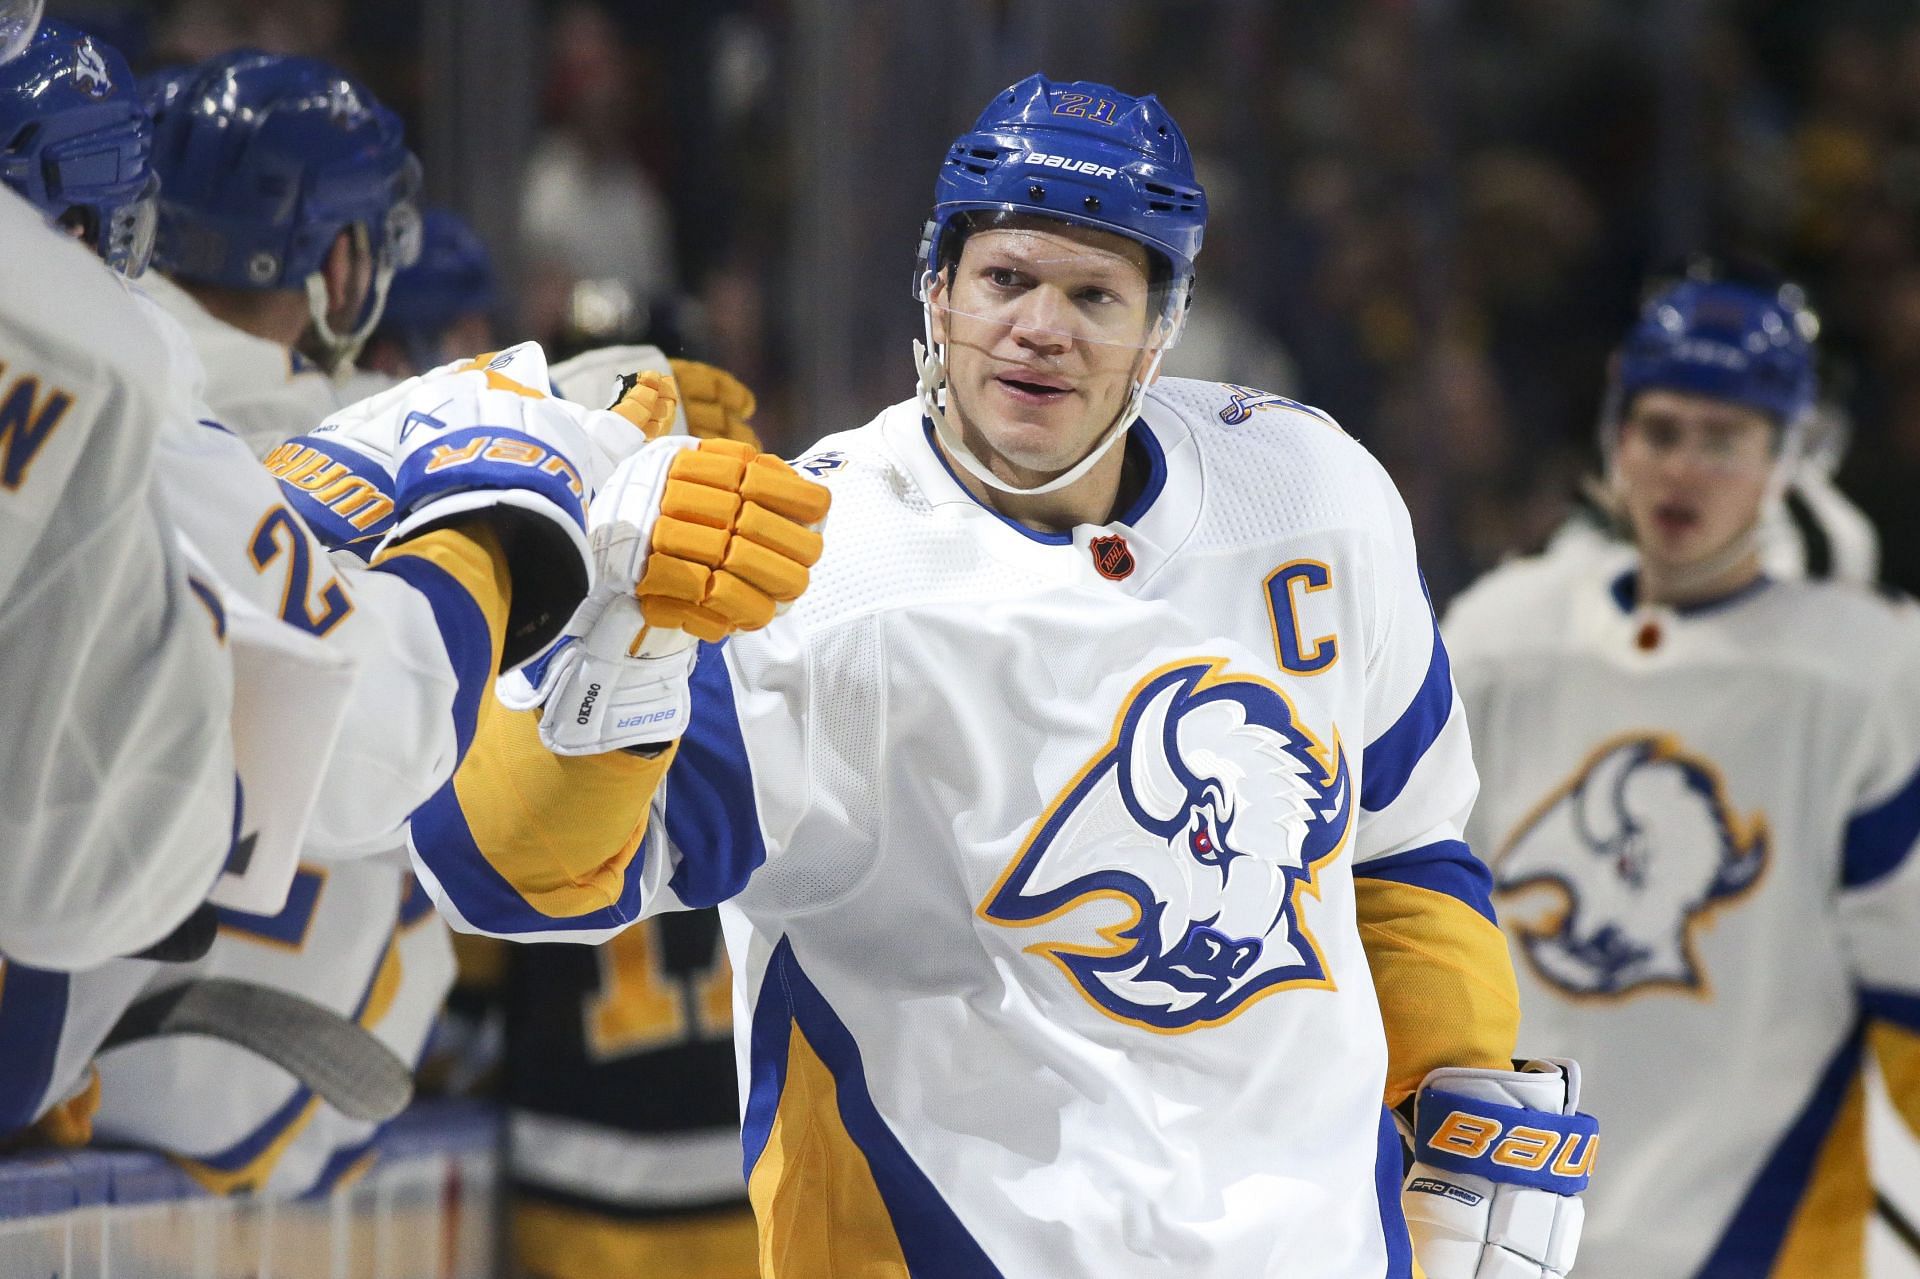 Kyle Okposo is the captain of the Sabres